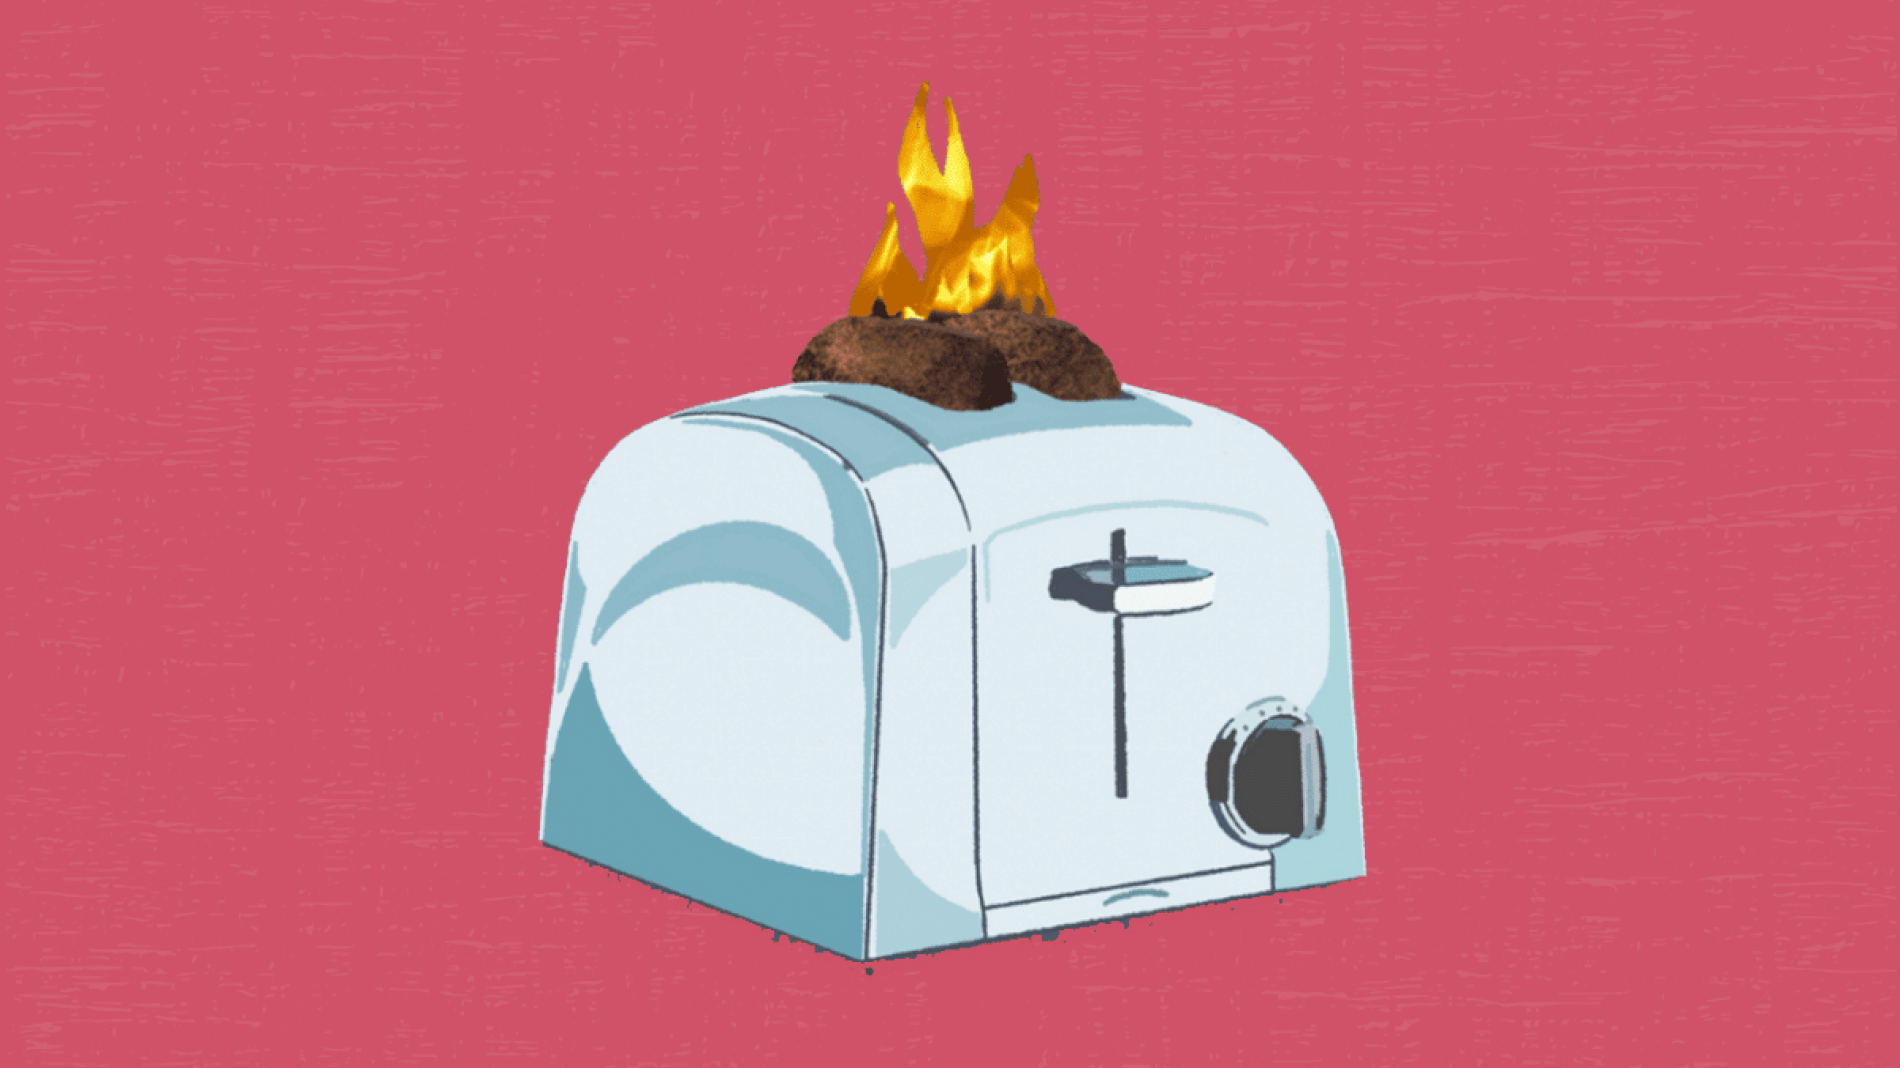 Illustration of burning toast in a toaster - burnout